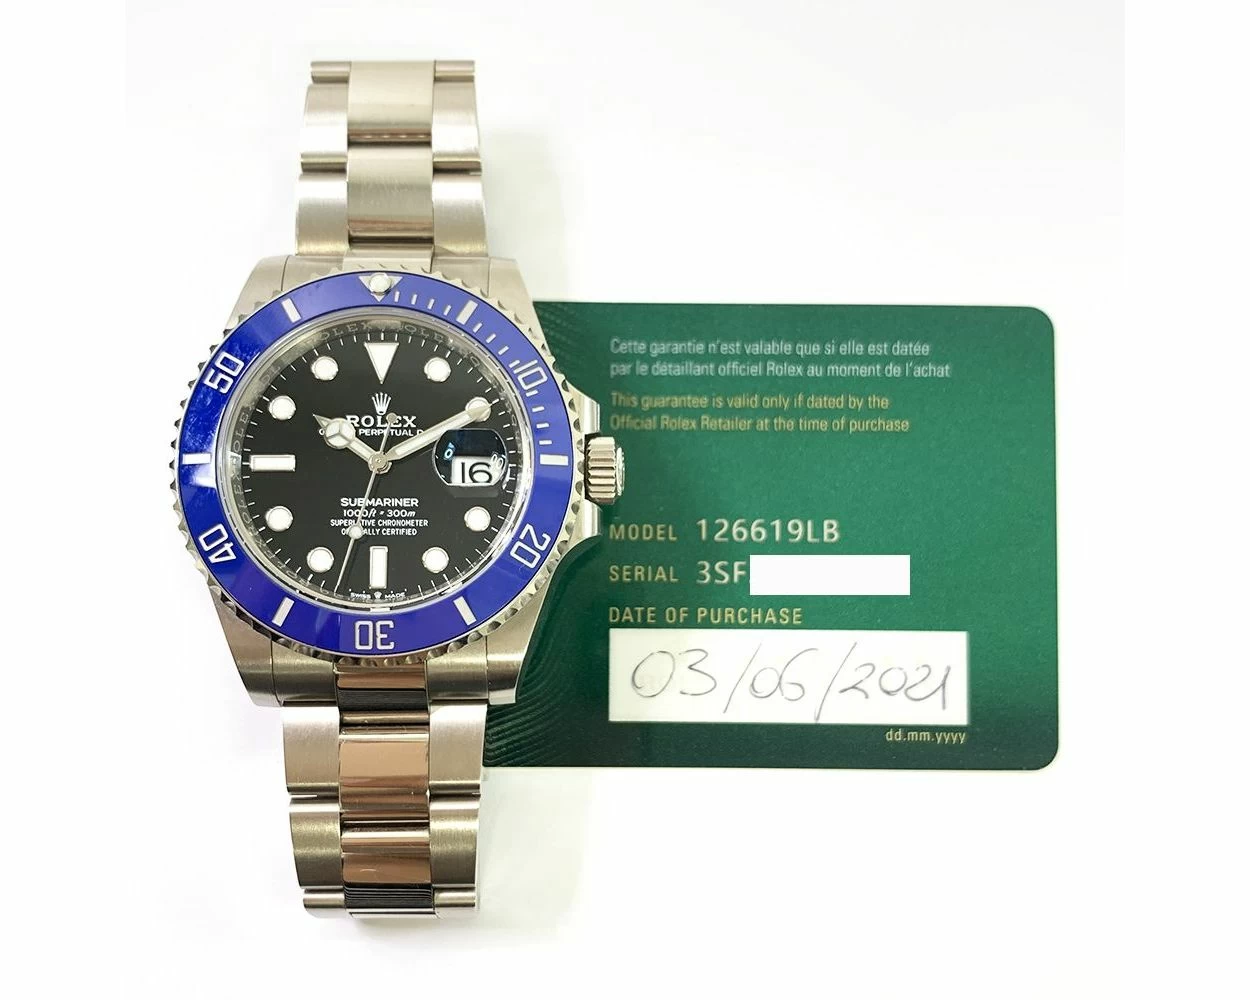 Rolex Submariner Date Black Dial 41mm 2021 126613LN - Buy from